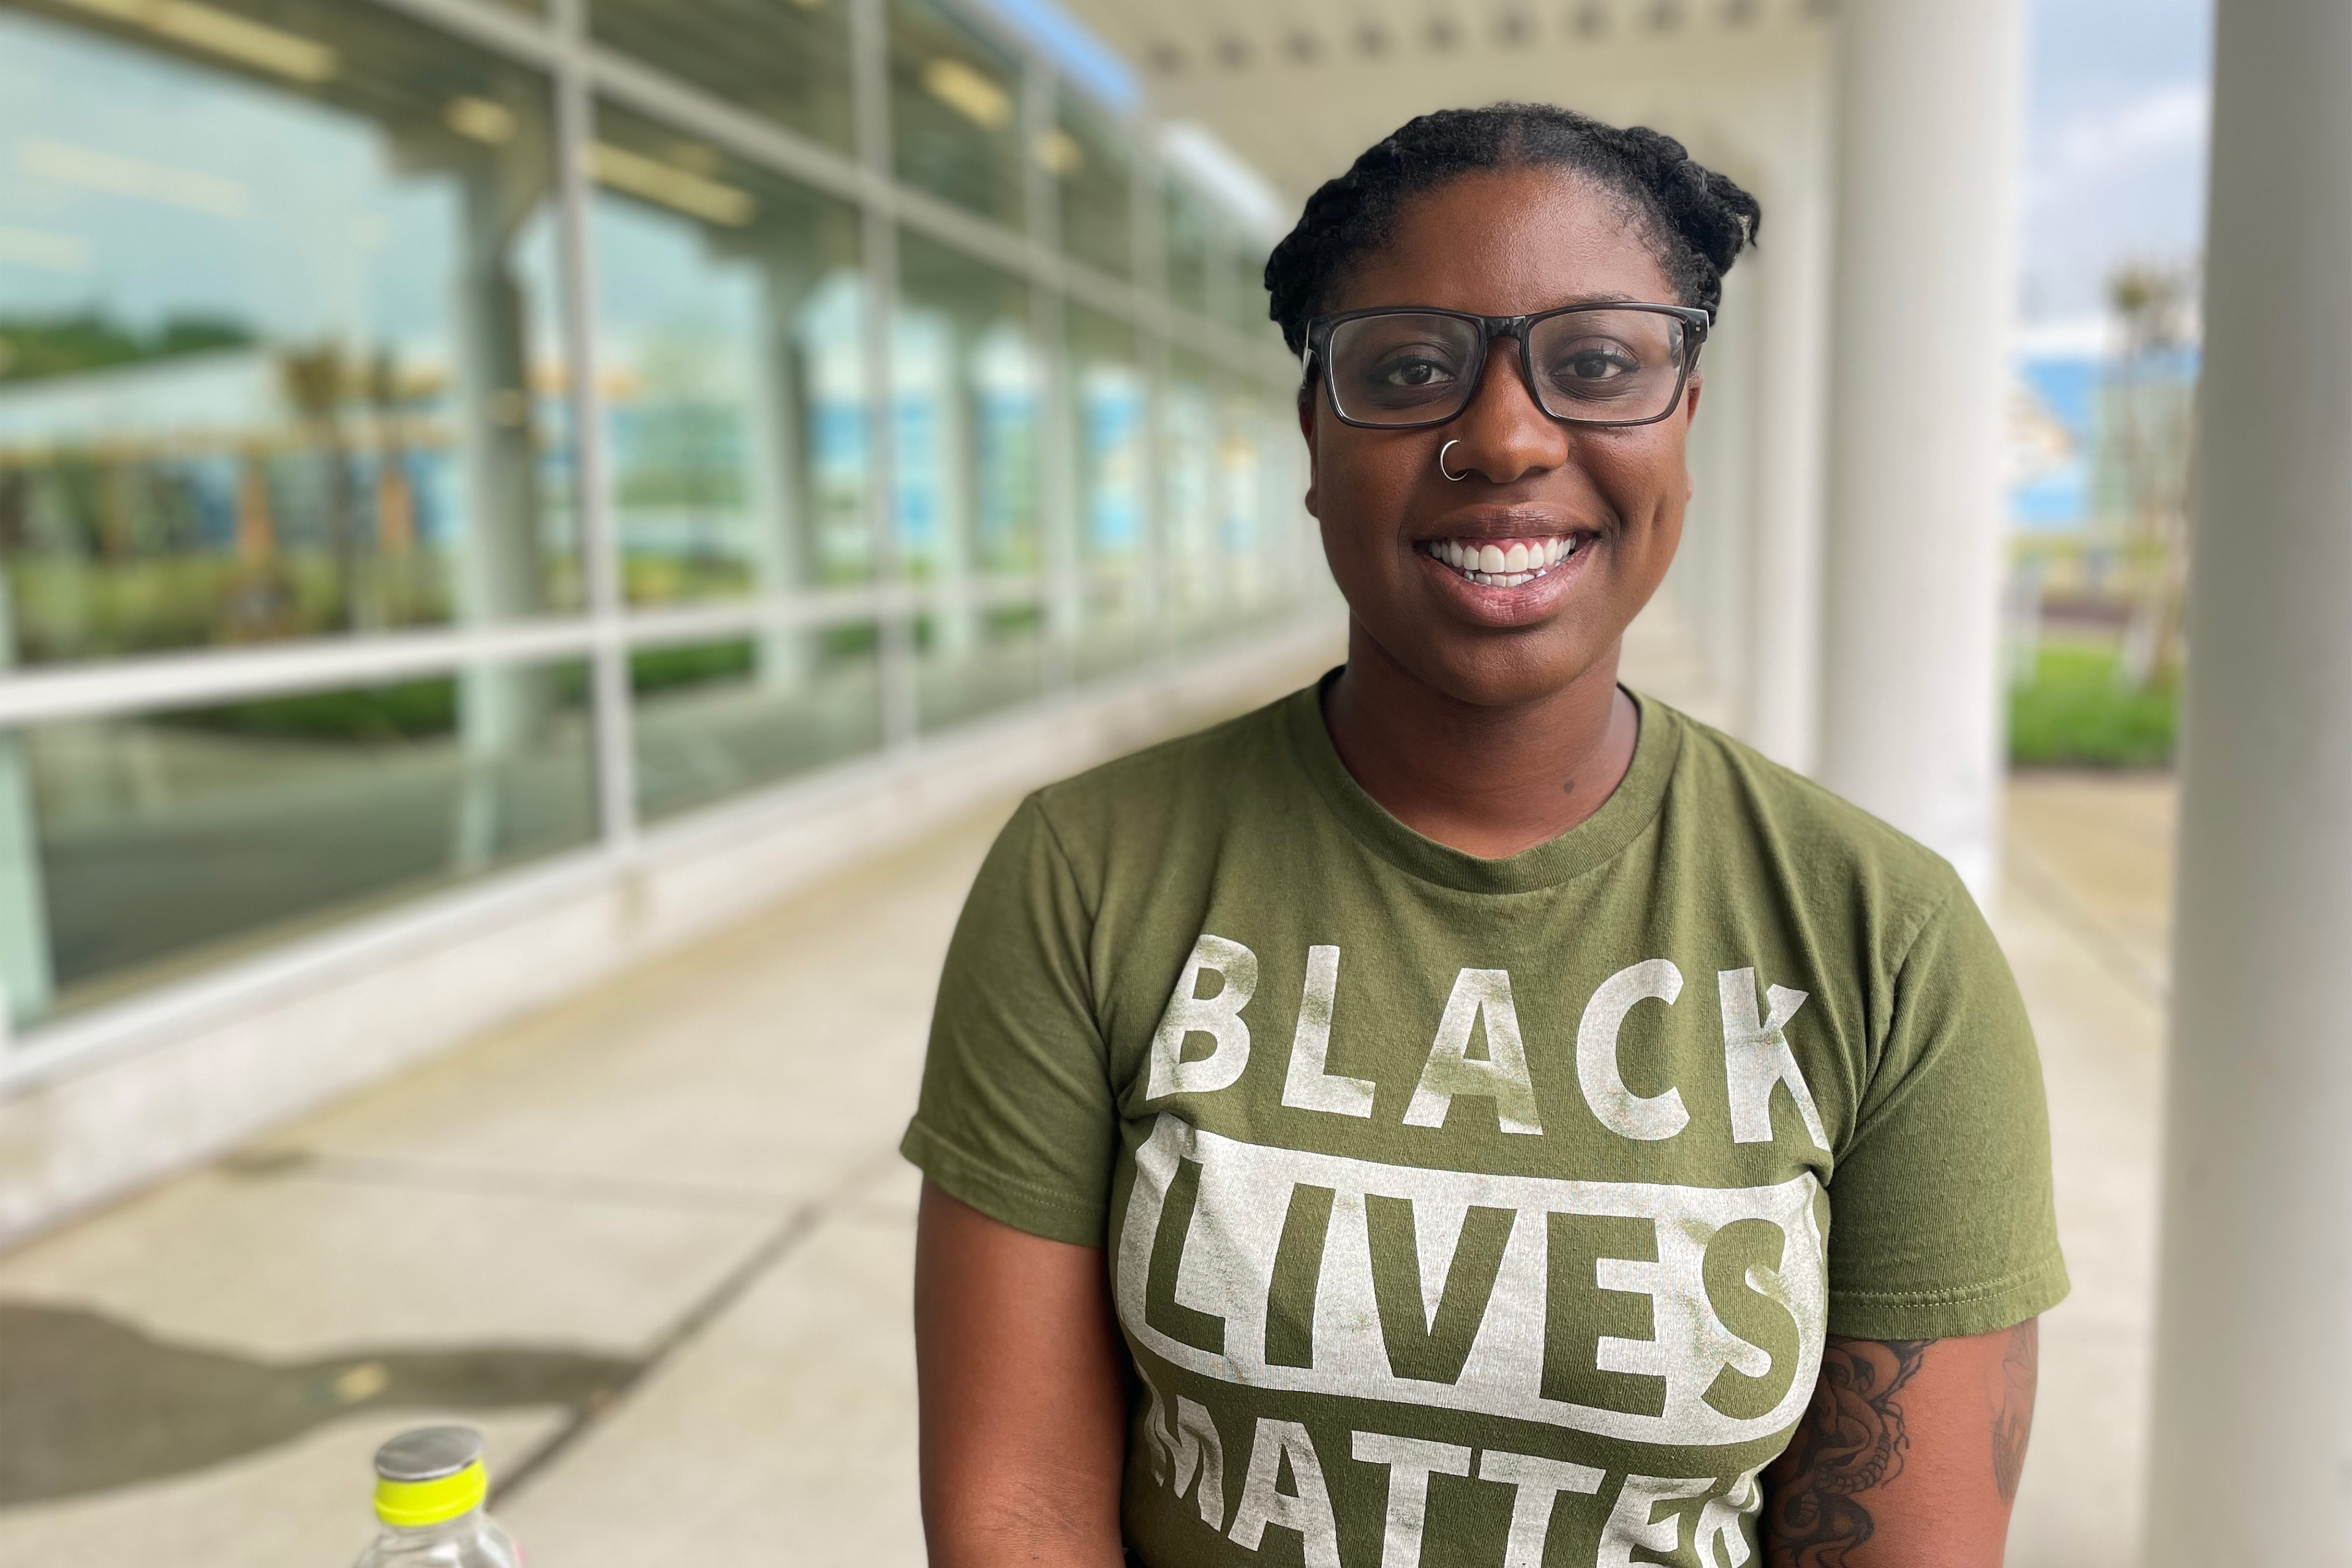 A portrait photo shows Tia Freeman smiling, wearing a green shirt with text that reads, "BLACK LIVES MATTER."